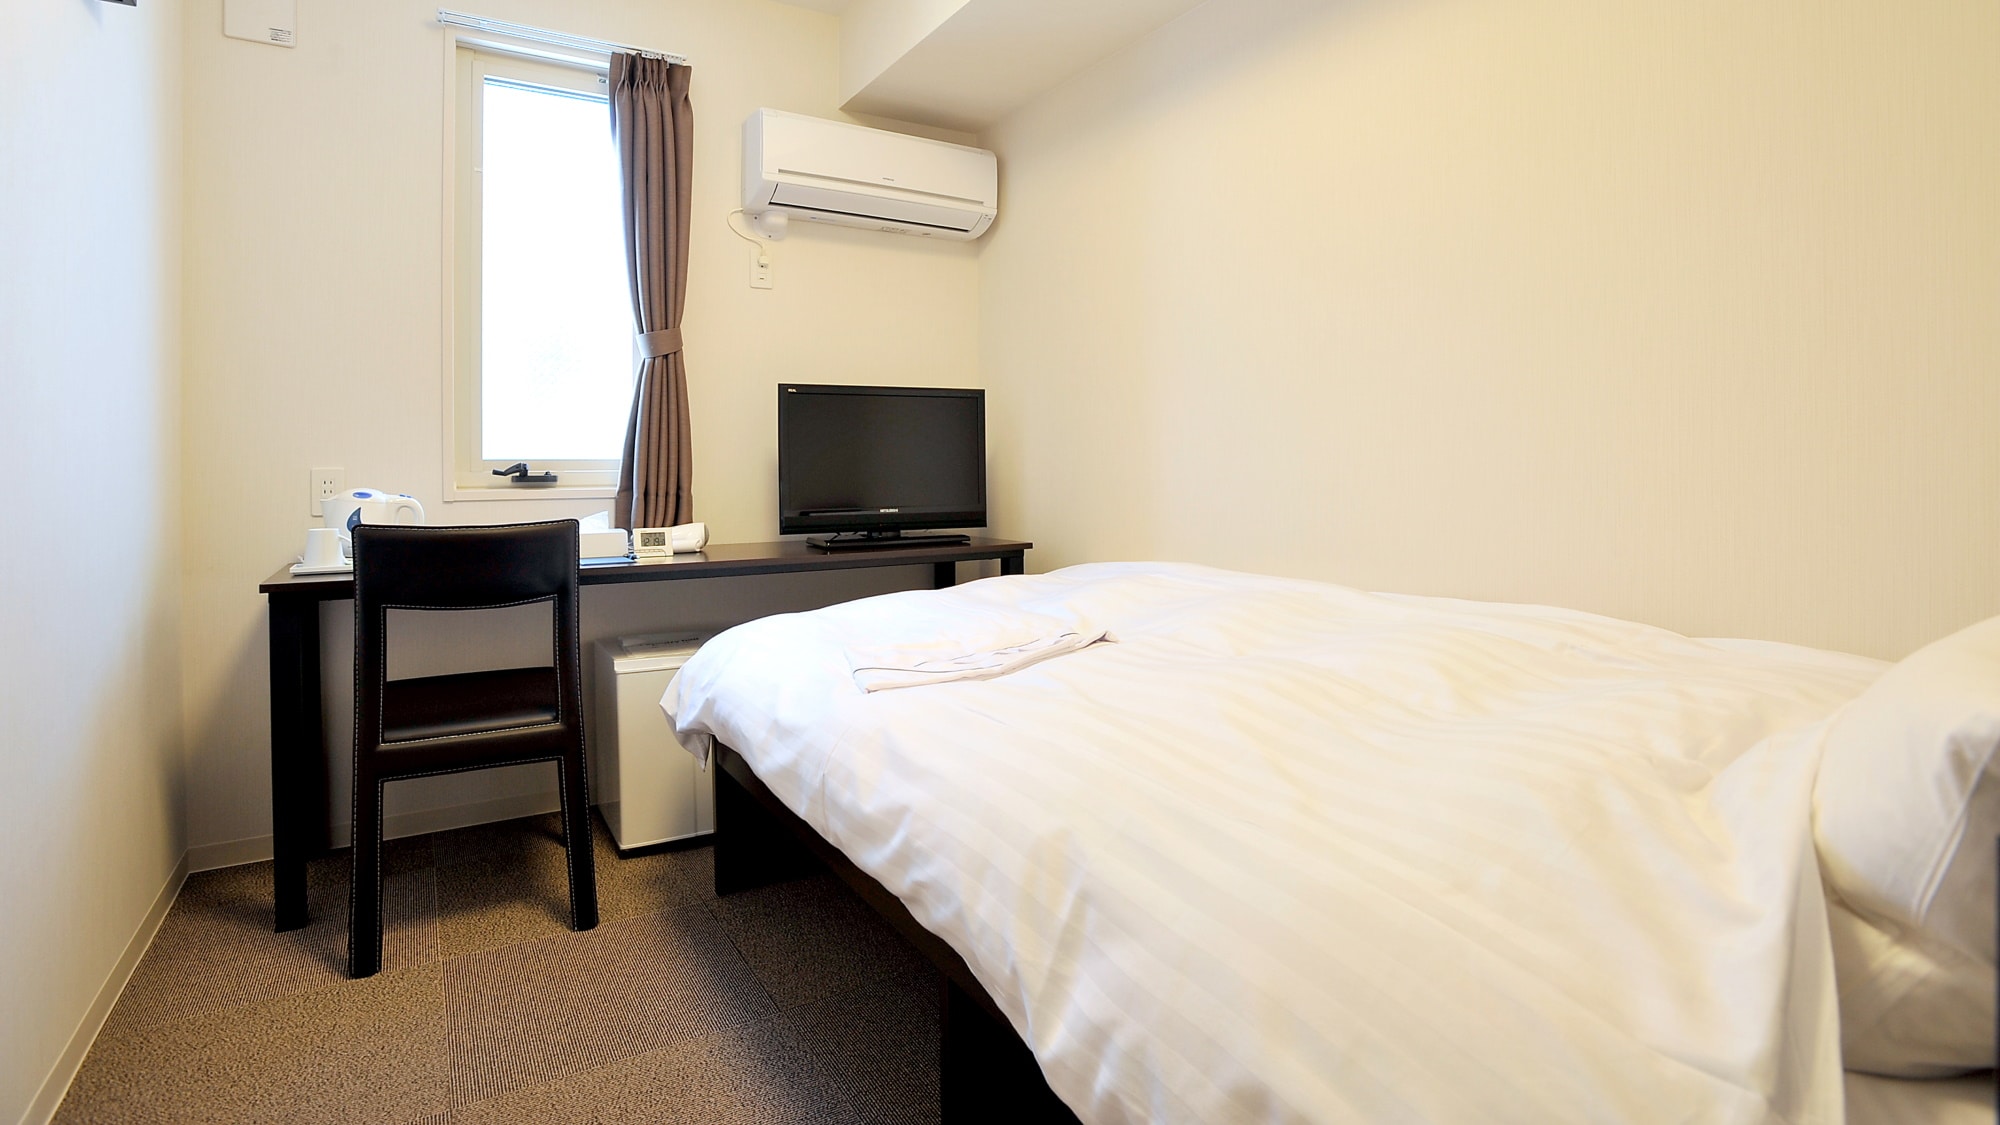 Single room (11.8㎡) Individual air conditioning and Wi-Fi are available. It is a functional room.